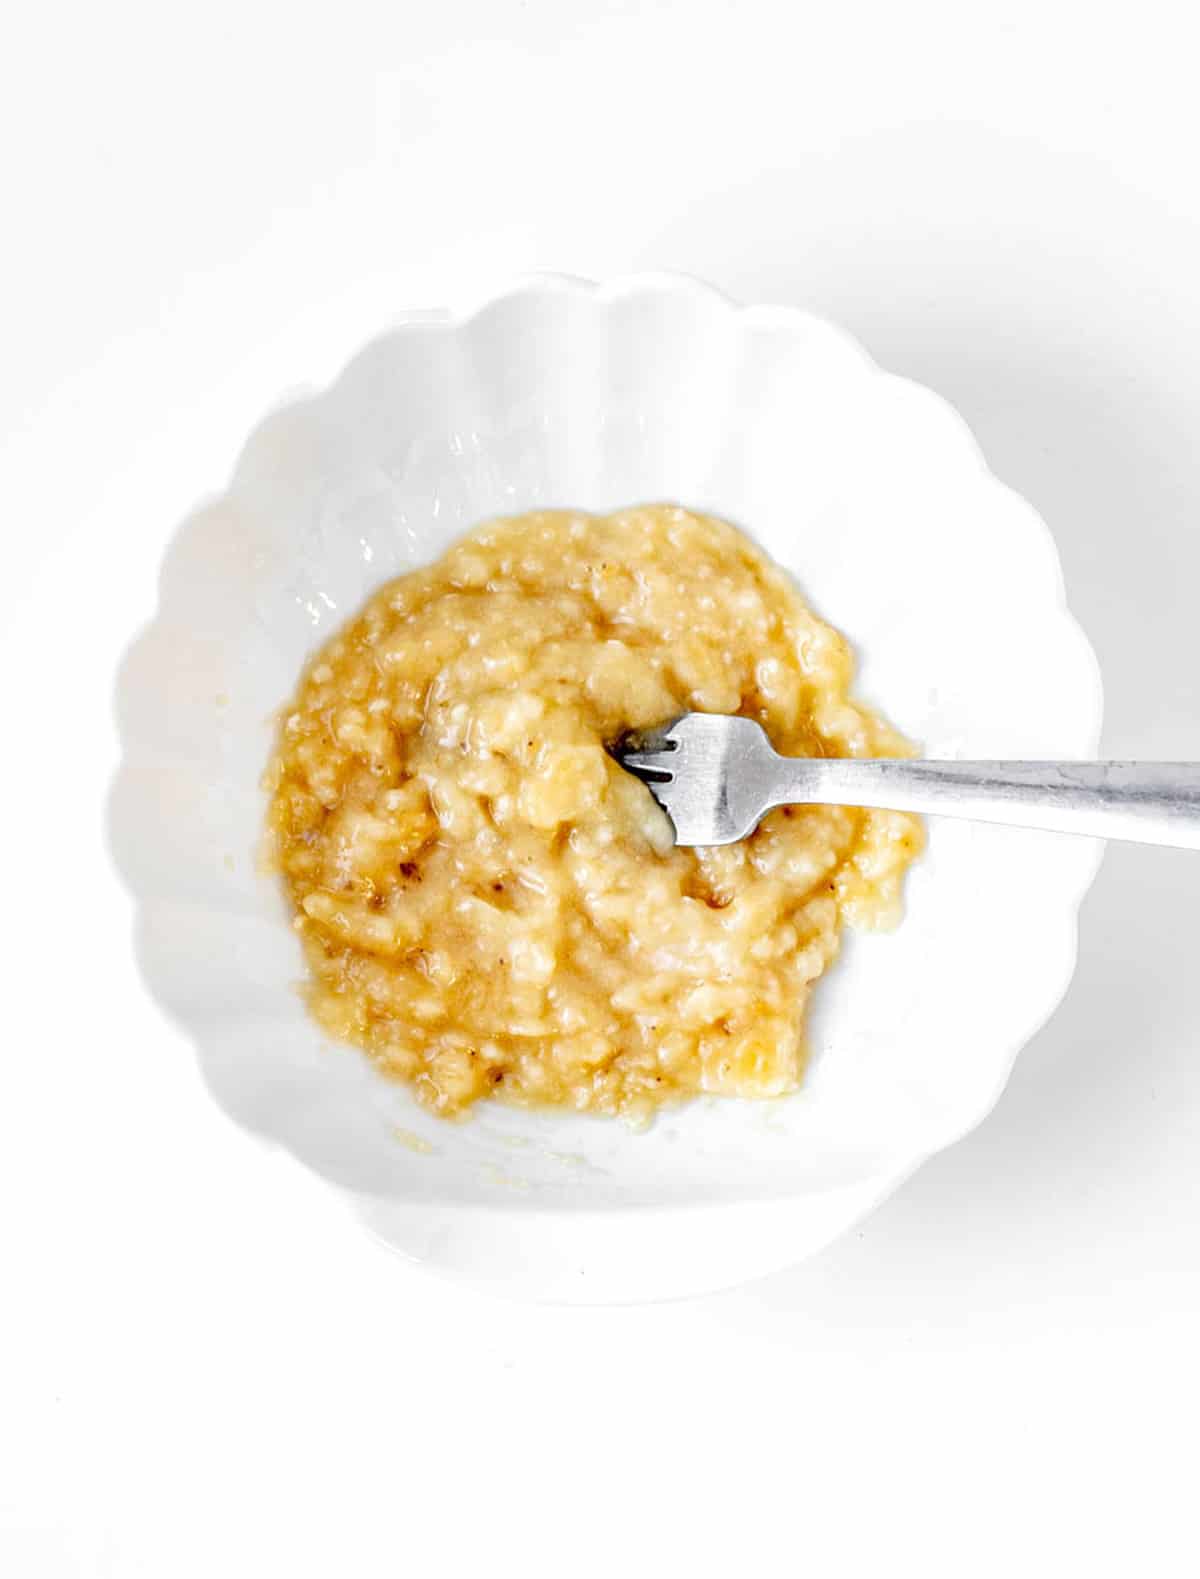 Mashed banana in a white bowl with a fork.